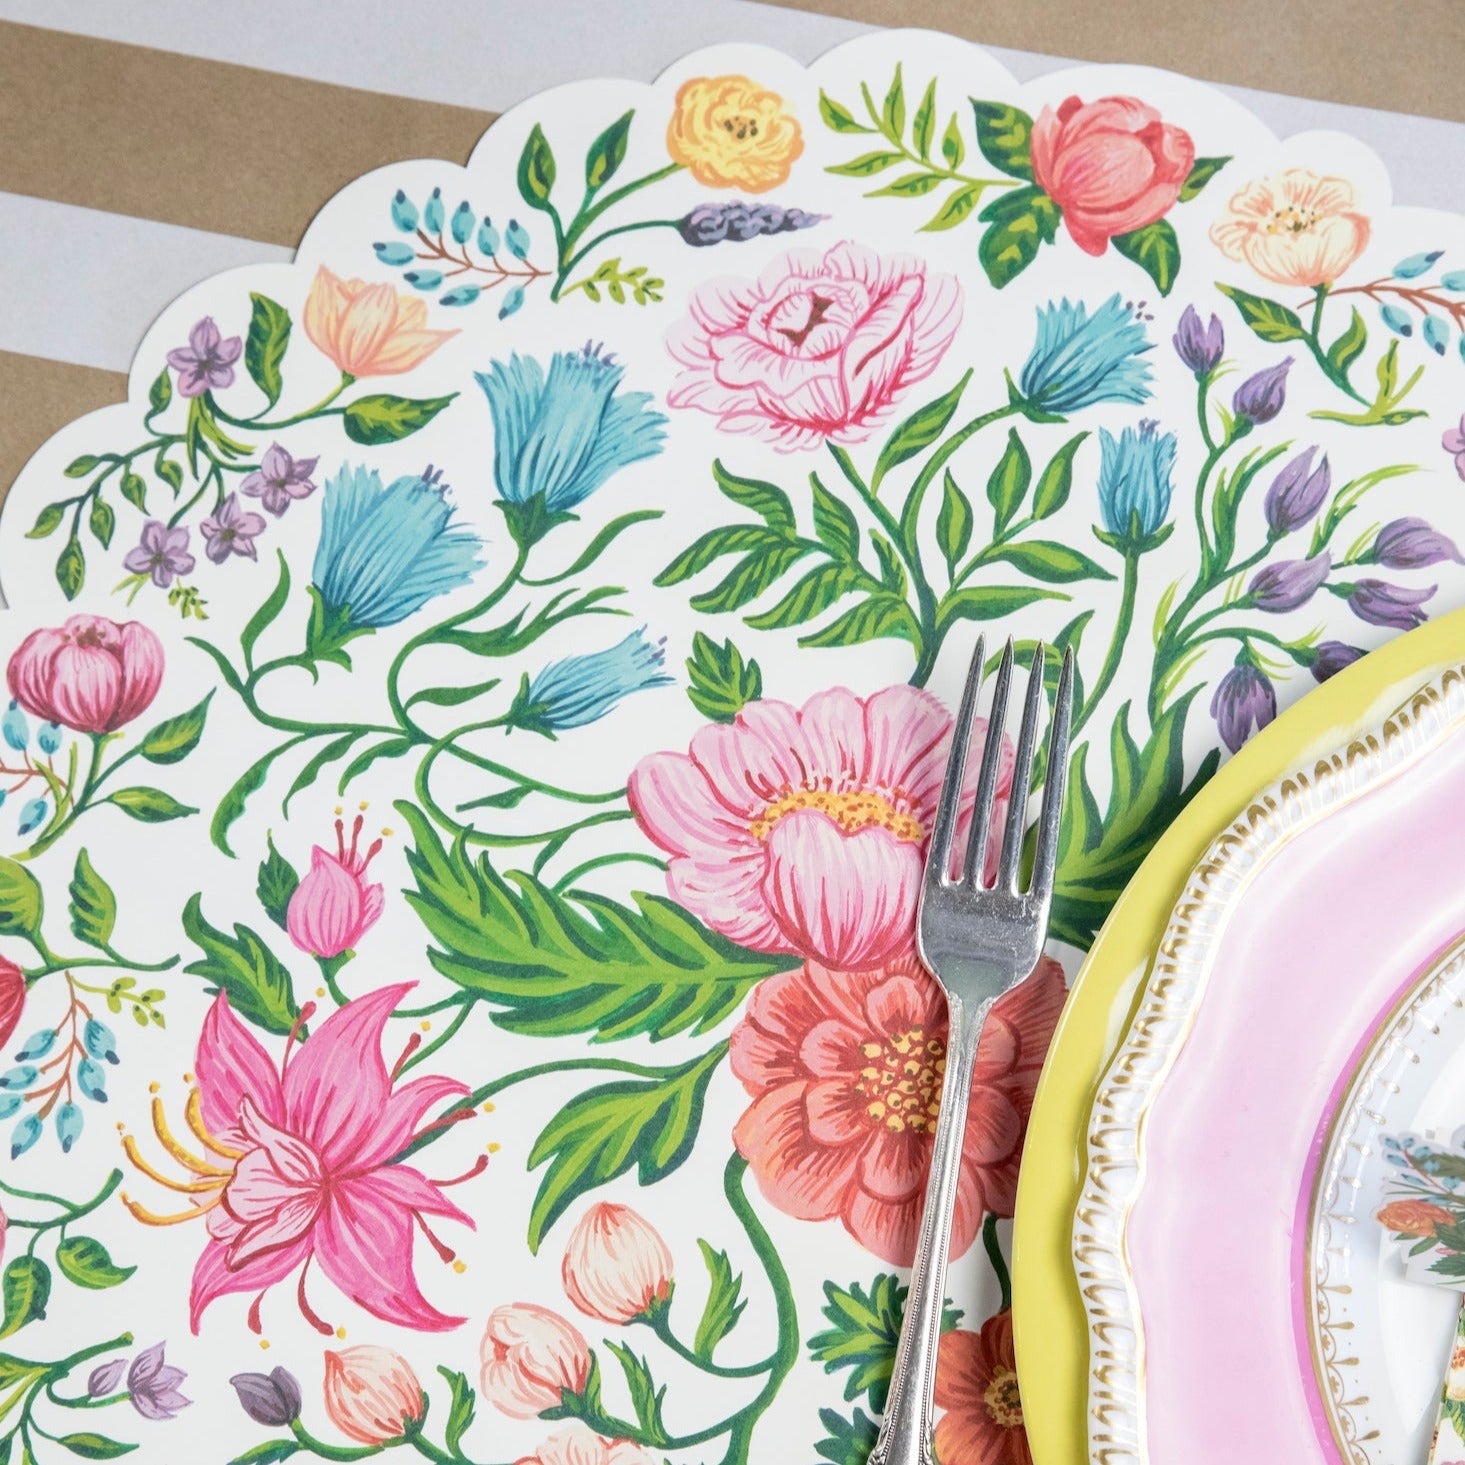 A Die-cut Sweet Garden Posey Placemat with colorful blooms by Hester &amp; Cook.